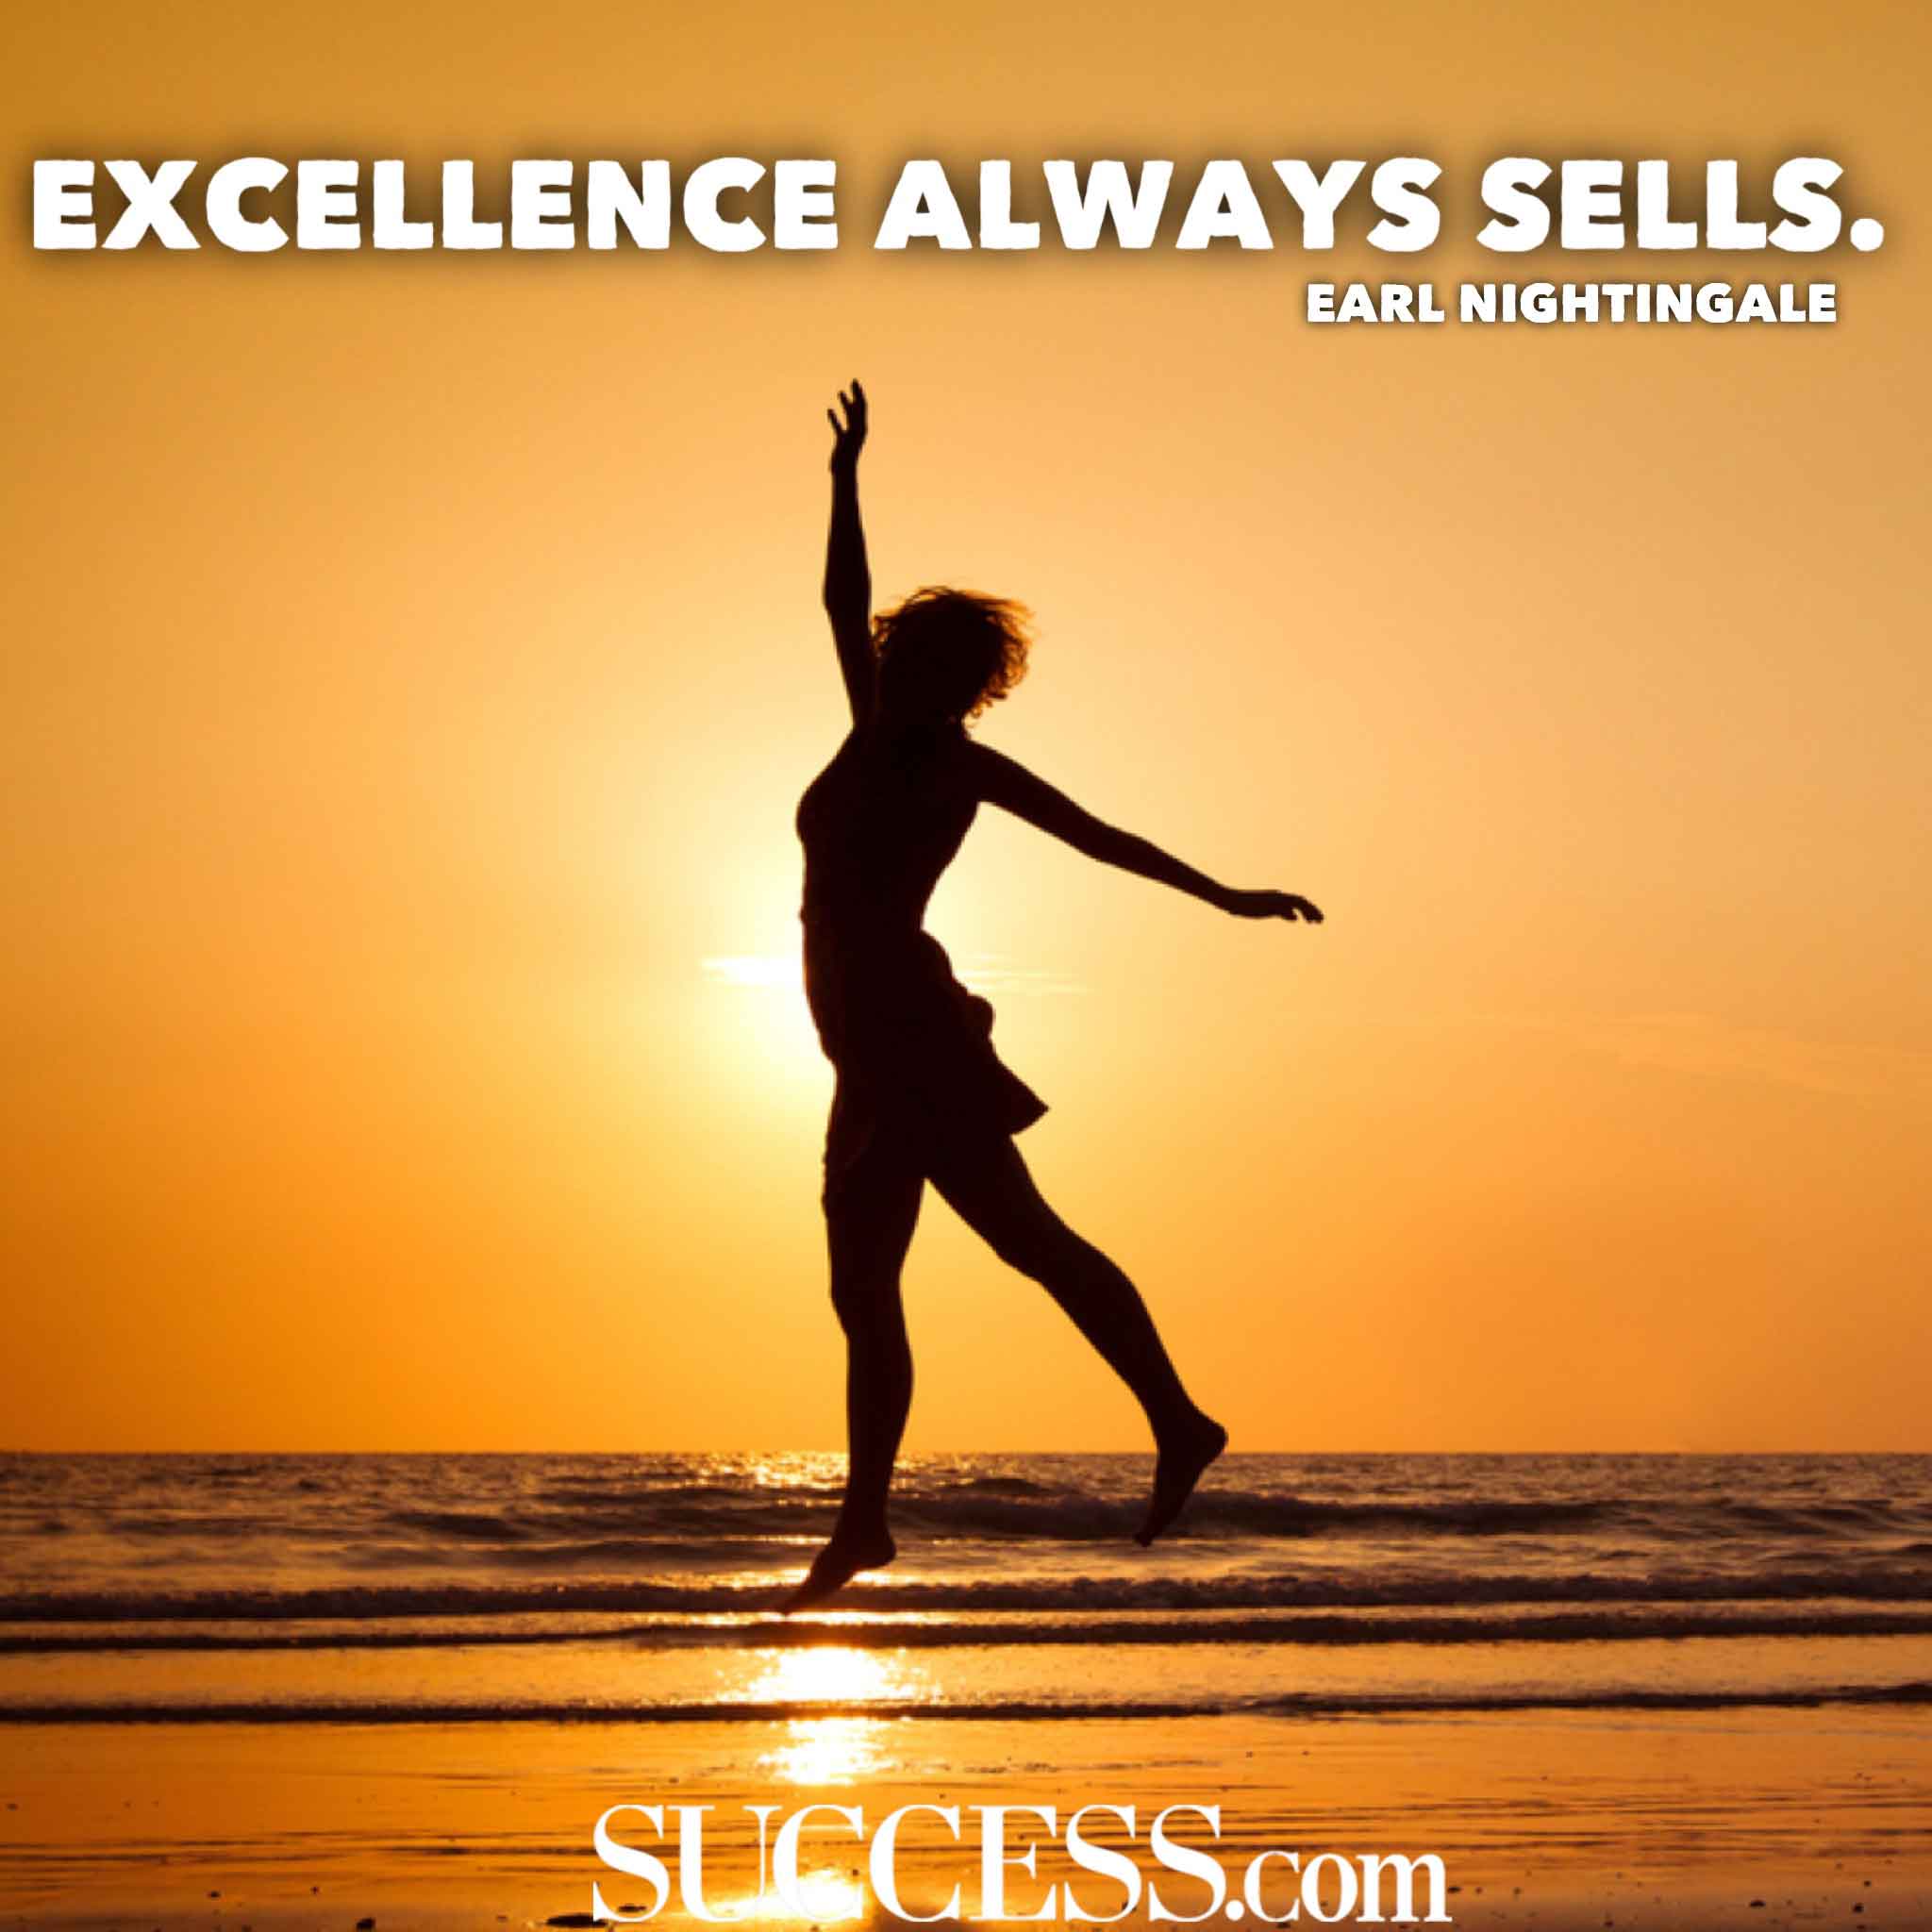 13 Motivational Quotes to Inspire Excellence